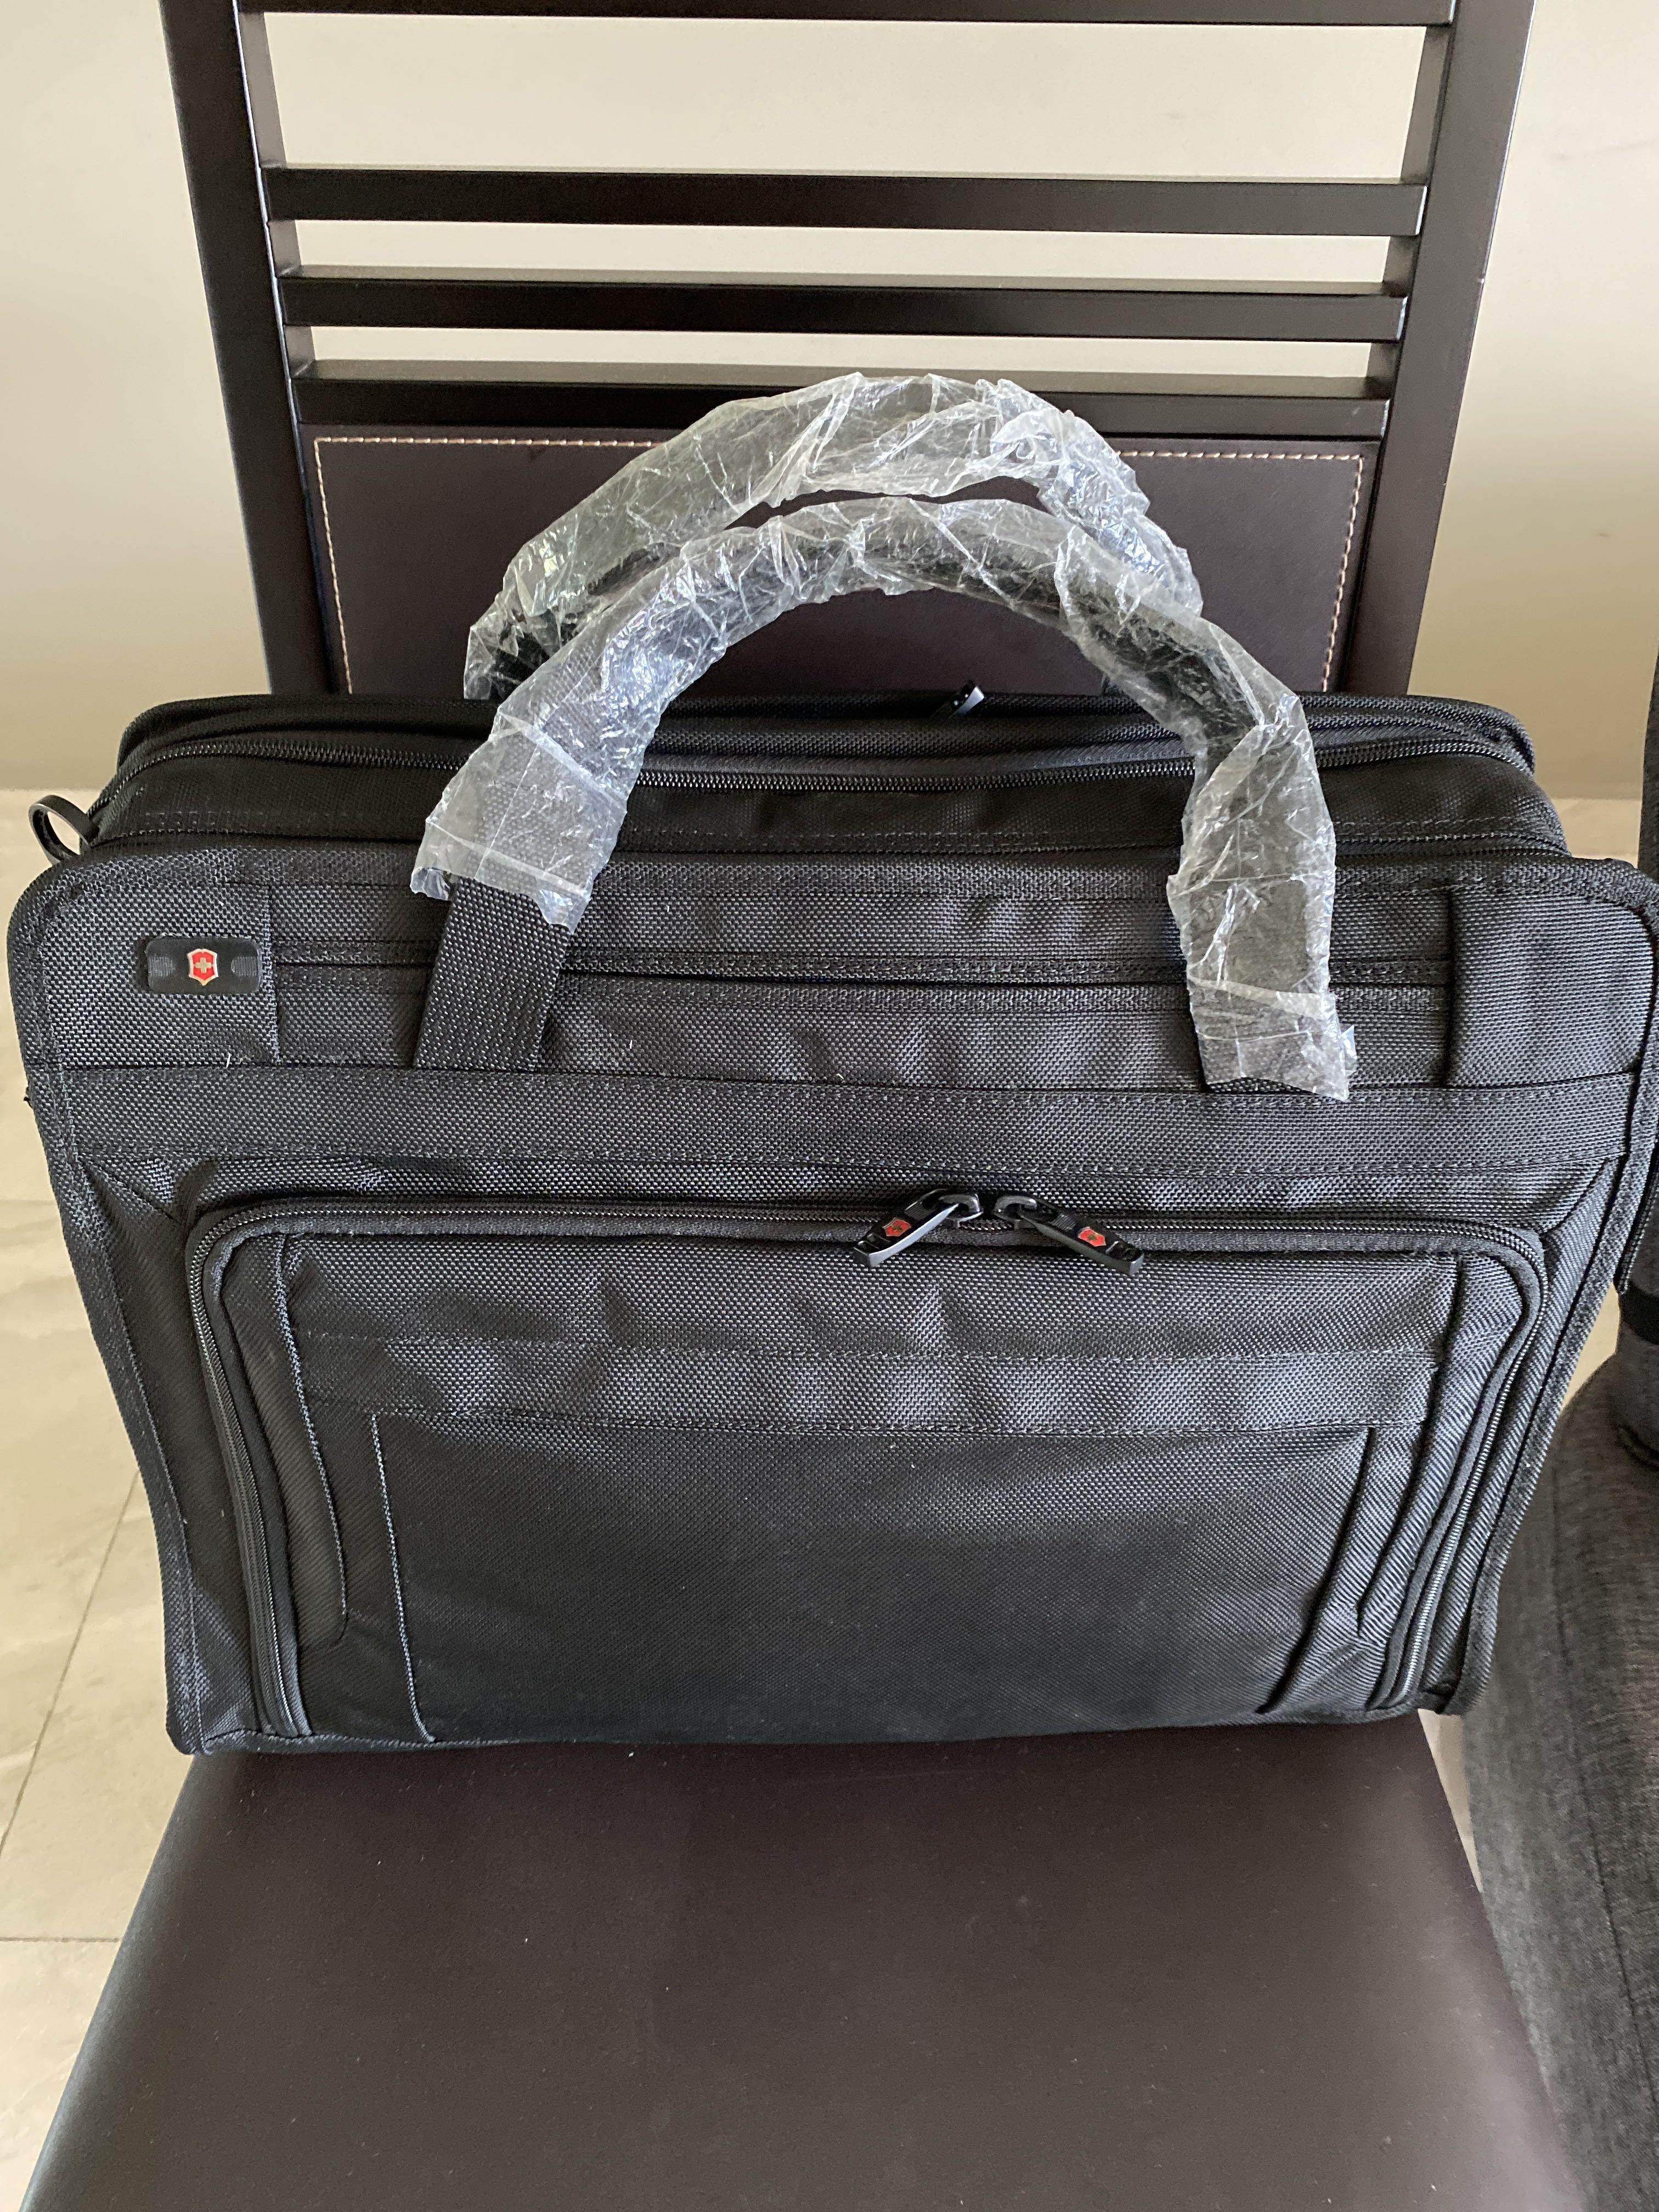 Victorinox laptop bag, Bags, Briefcases on